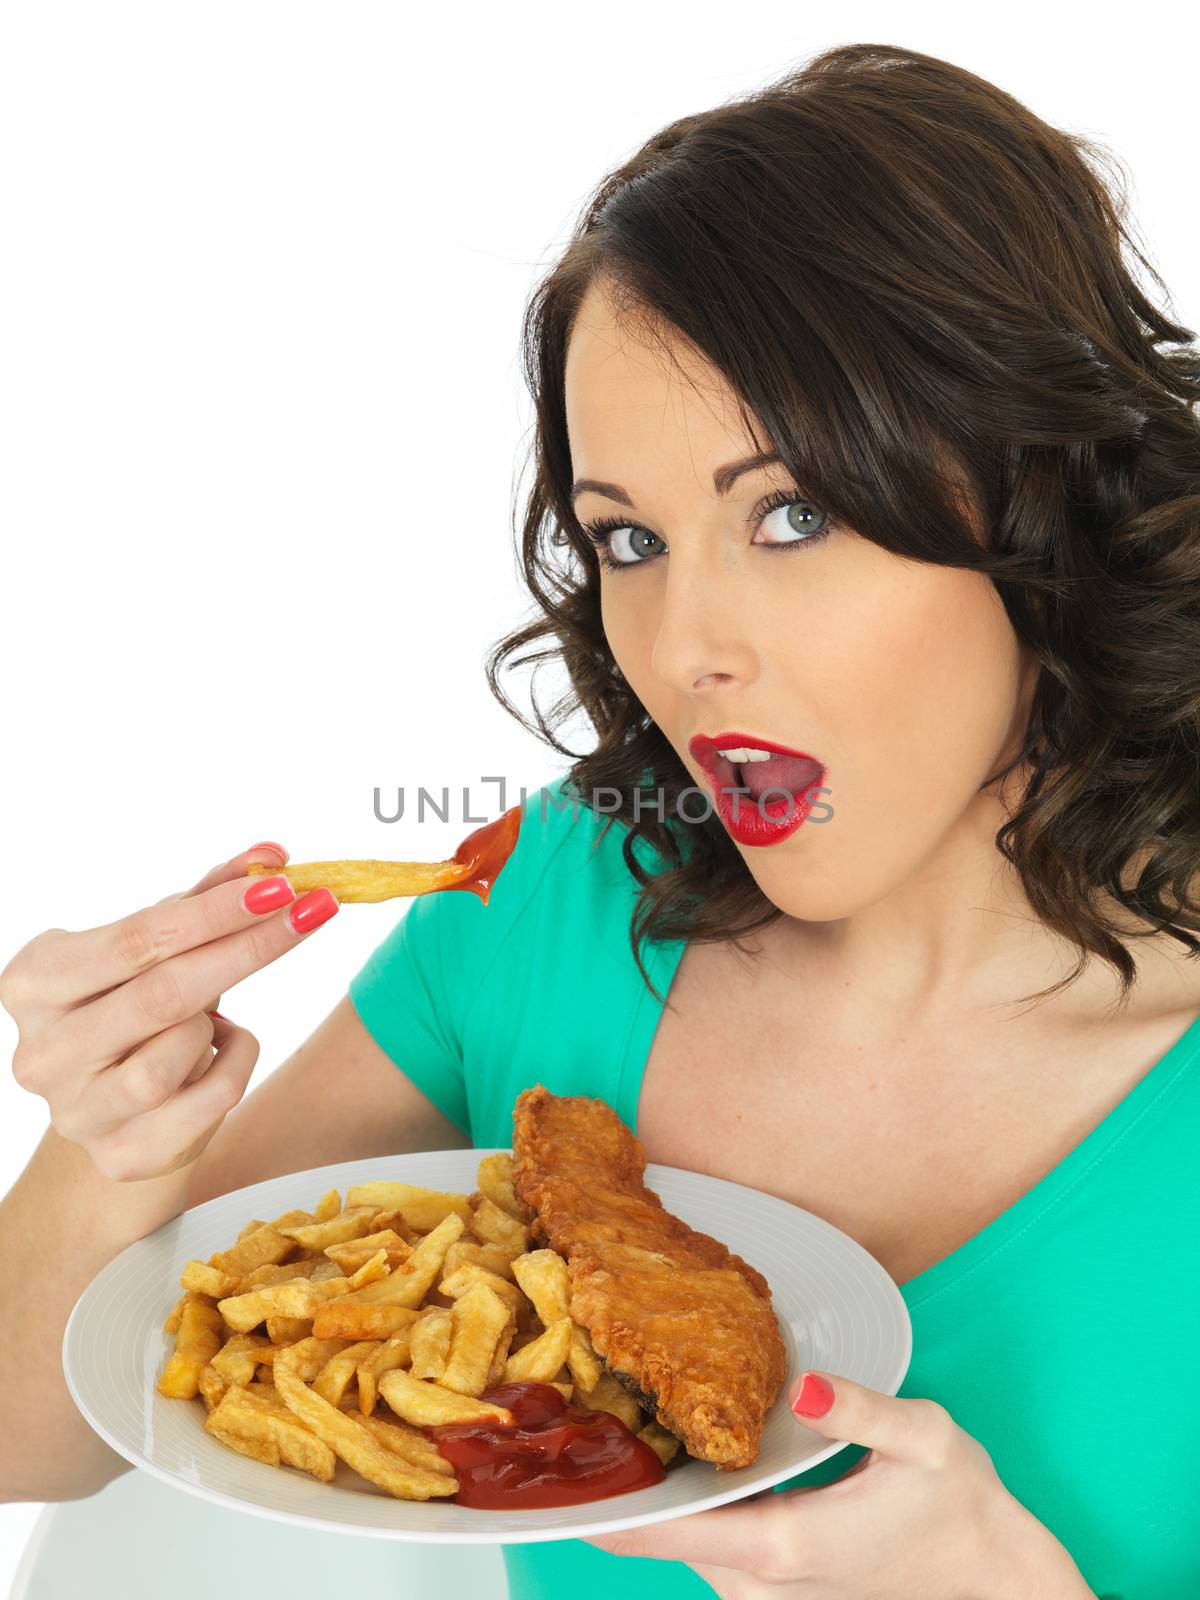 Young Woman Eating Traditional Fish and Chips by Whiteboxmedia